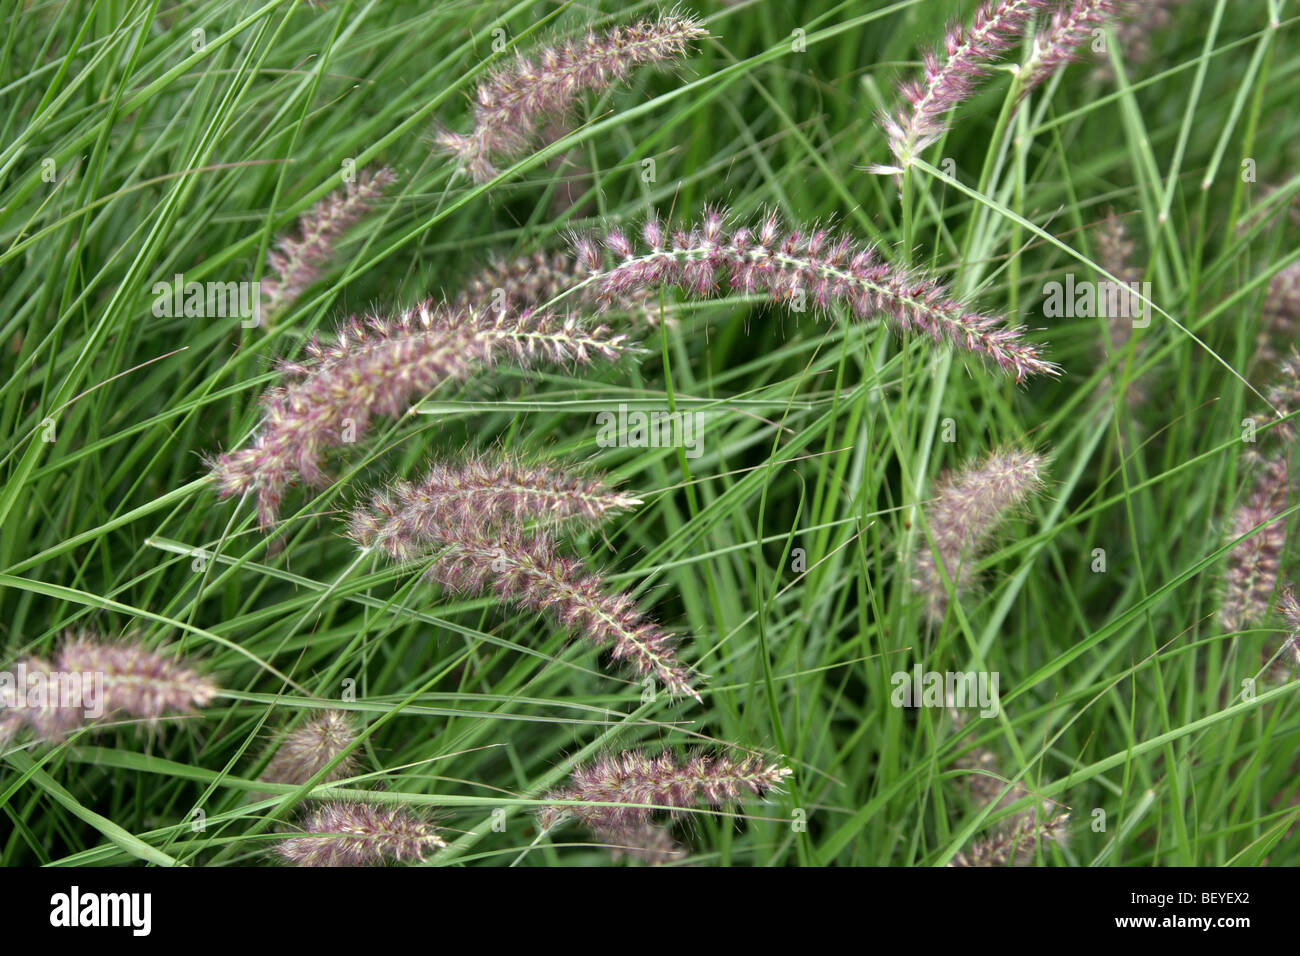 La Fontaine Chinoise Grass, Pennisetum Alopecuoides 'Karley-Rose', Poaceae Aka Swamp-Foxtail, Herbe Chinoise De La Millet. Chine. Banque D'Images